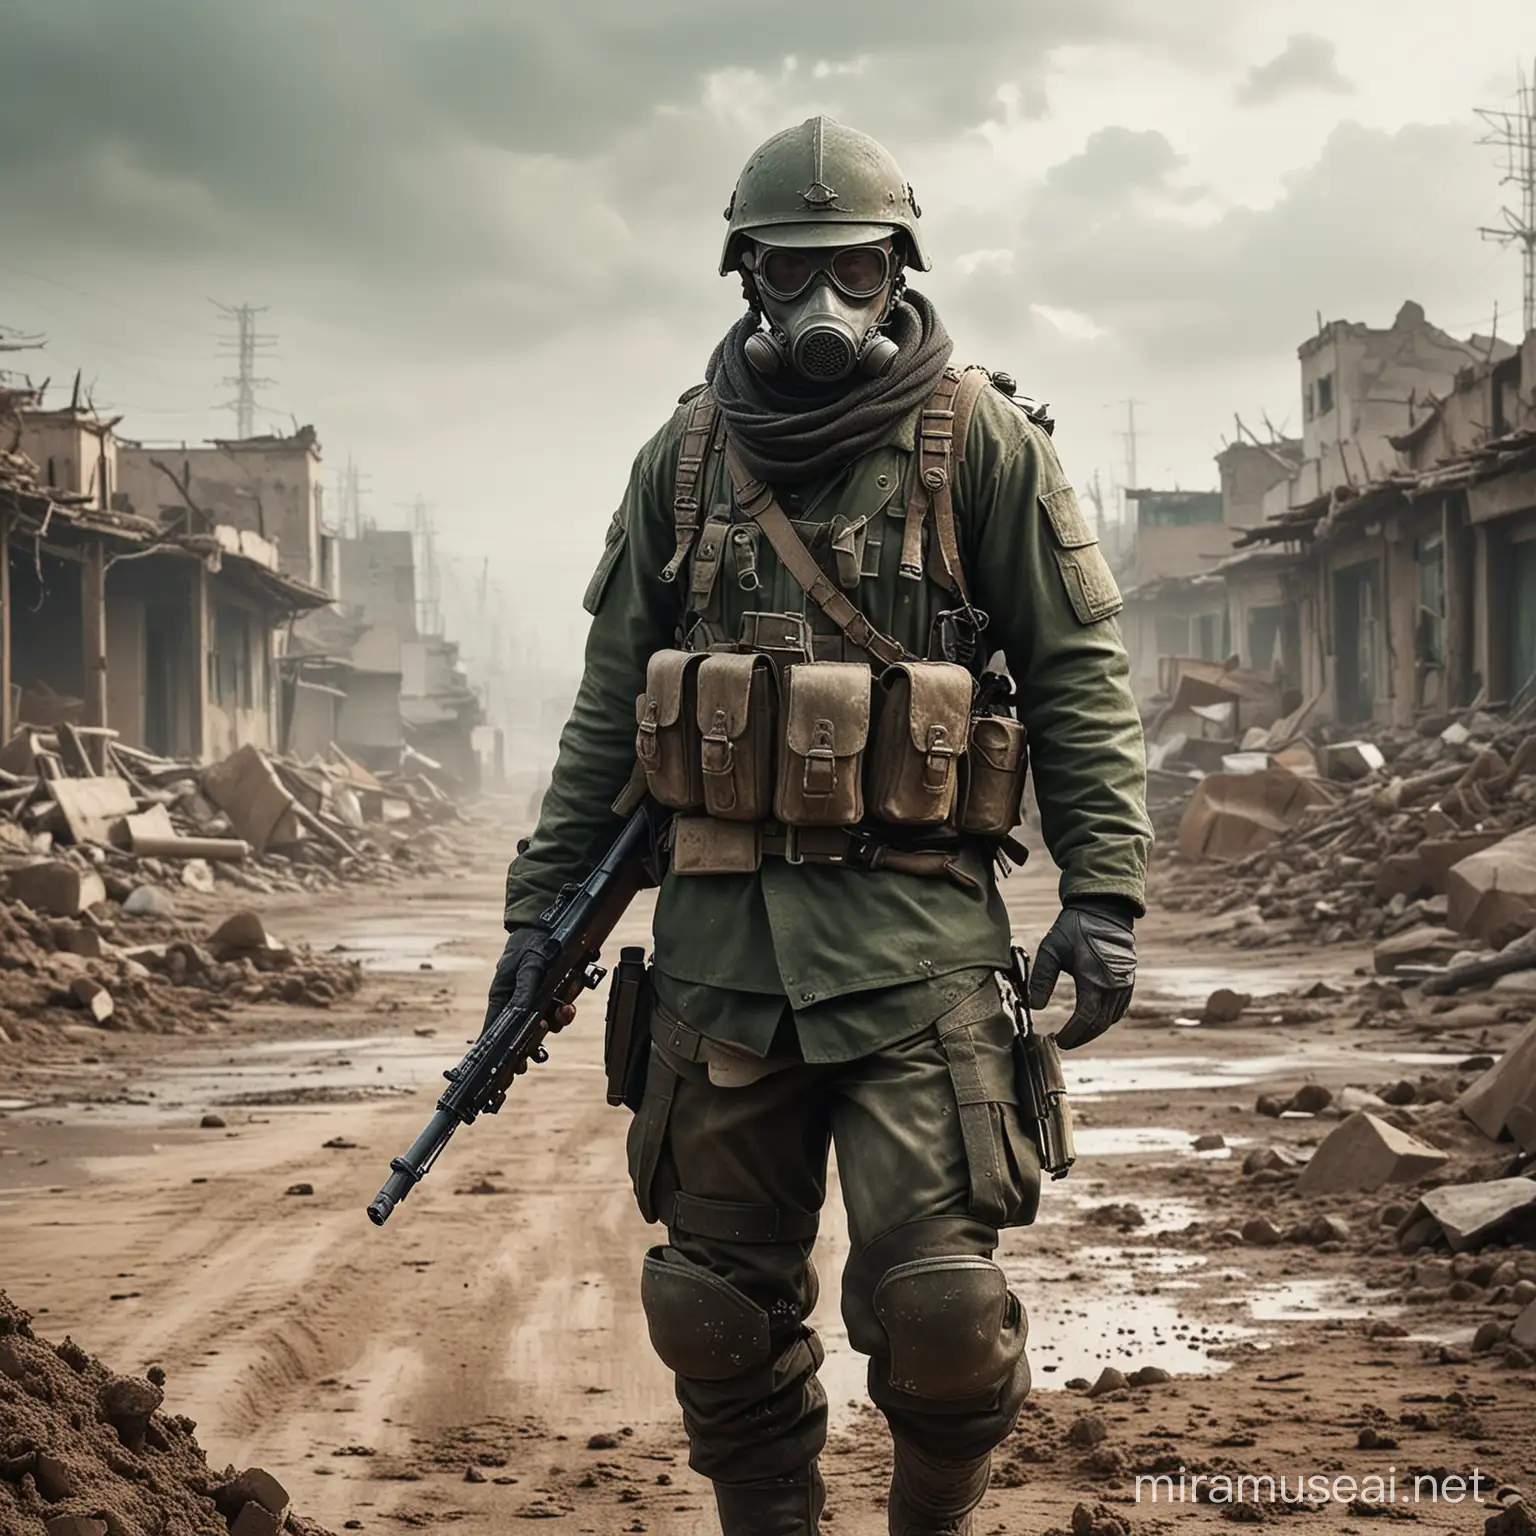 China soldier in post post apocalyptic world.Flogy weather,ground is mud.He has old armor,helmet,sand green gas mask and ak74 gun.He is under attack.Realistic,detailed.Near by nuclear damaged place